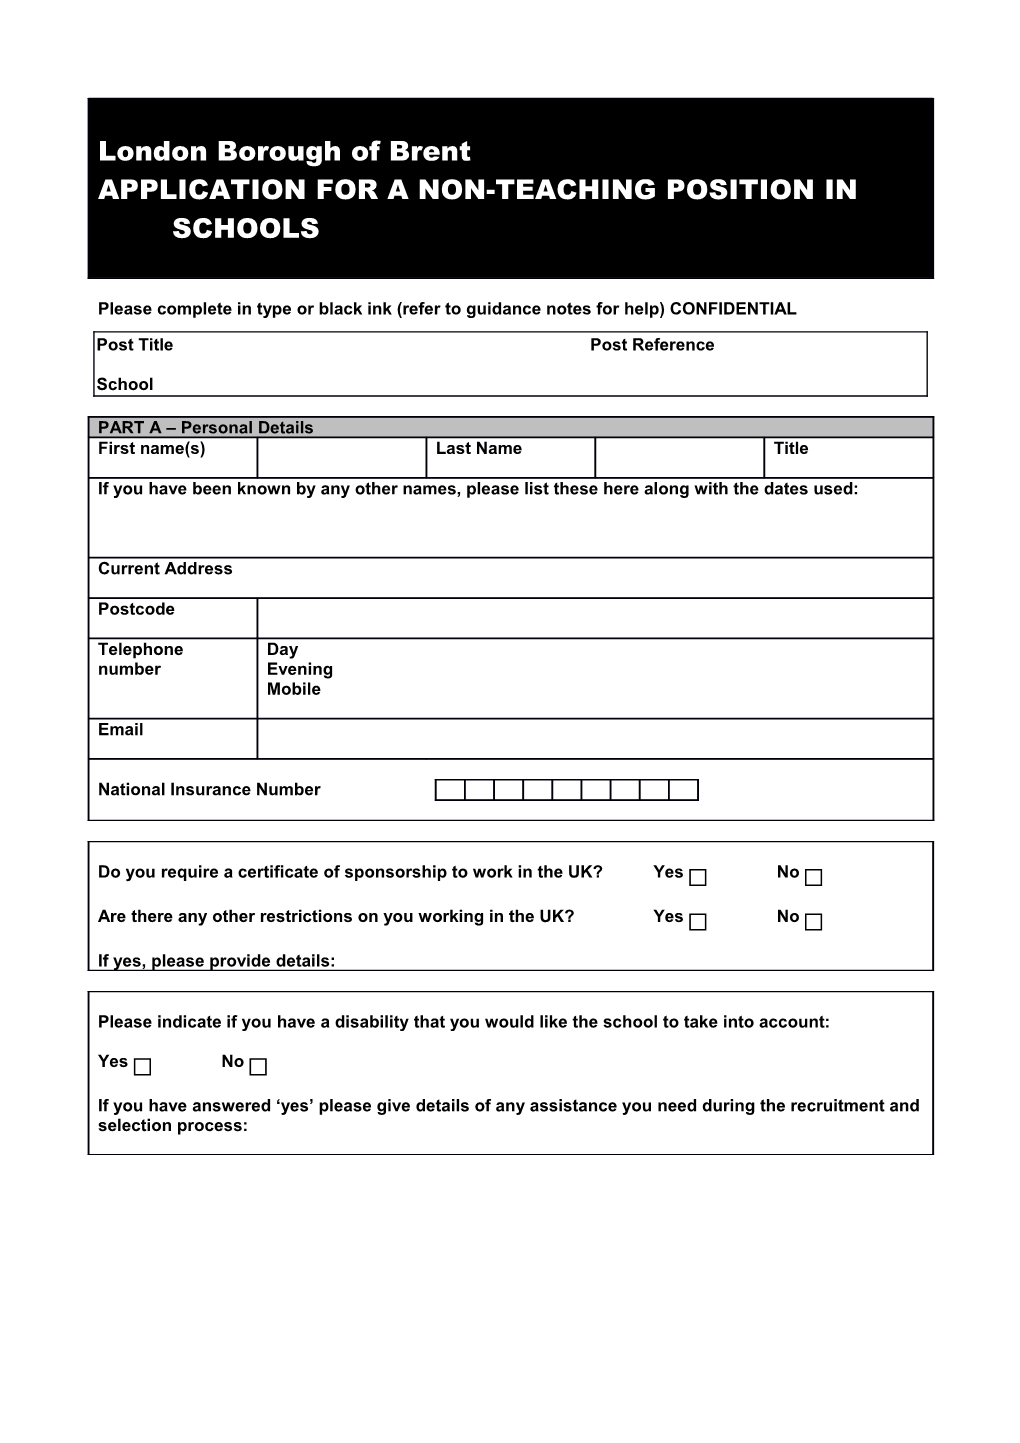 Application for a Teaching Appointment